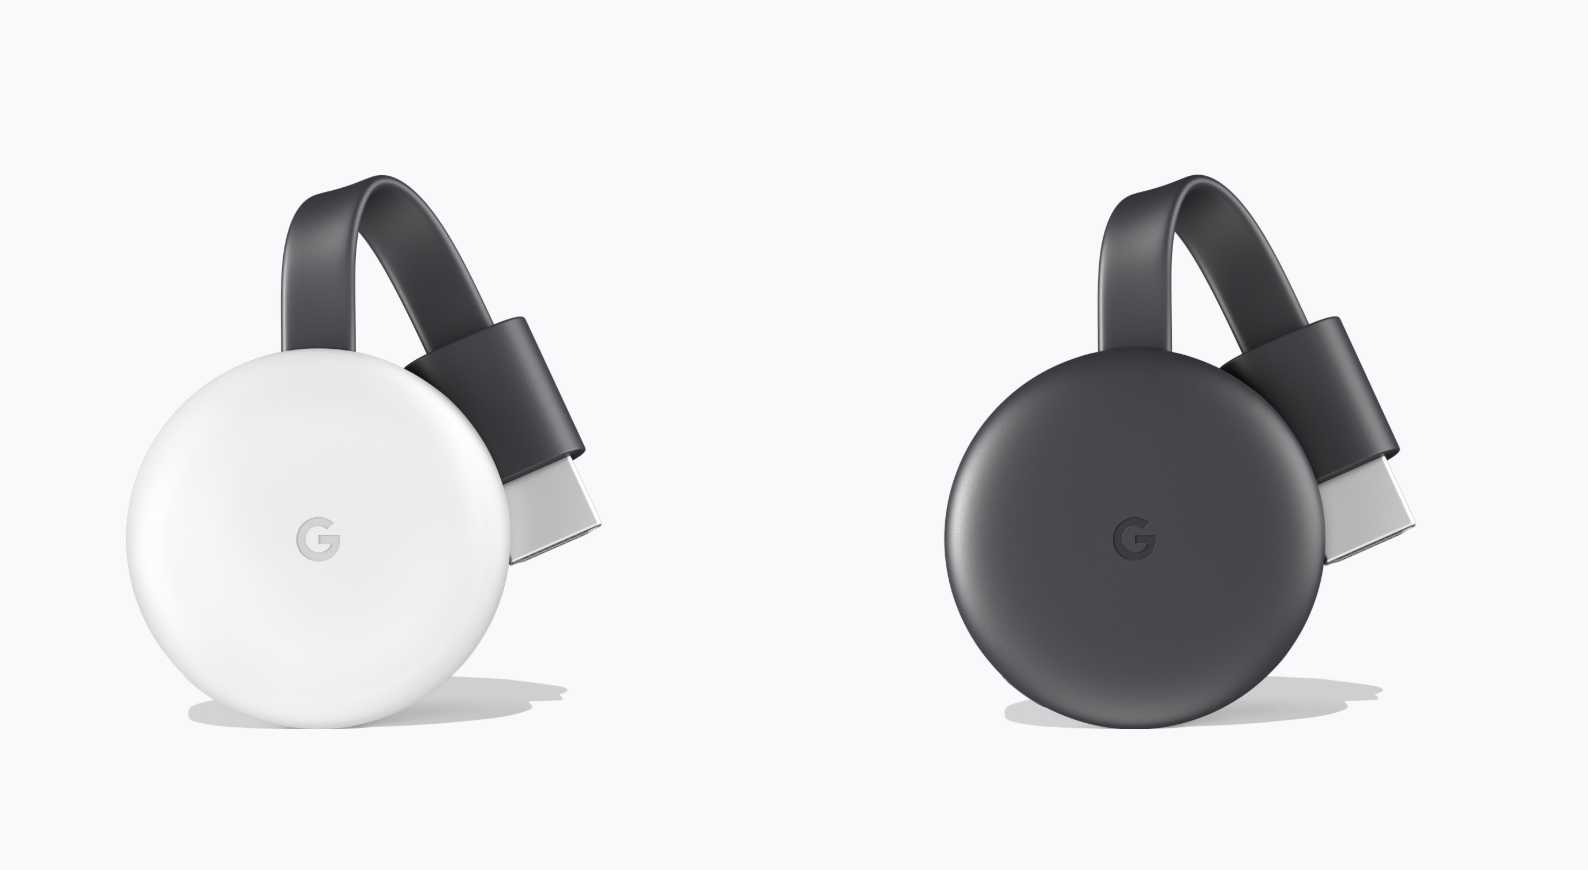 Google's Chromecast gets a refresh with support for Wi-Fi |